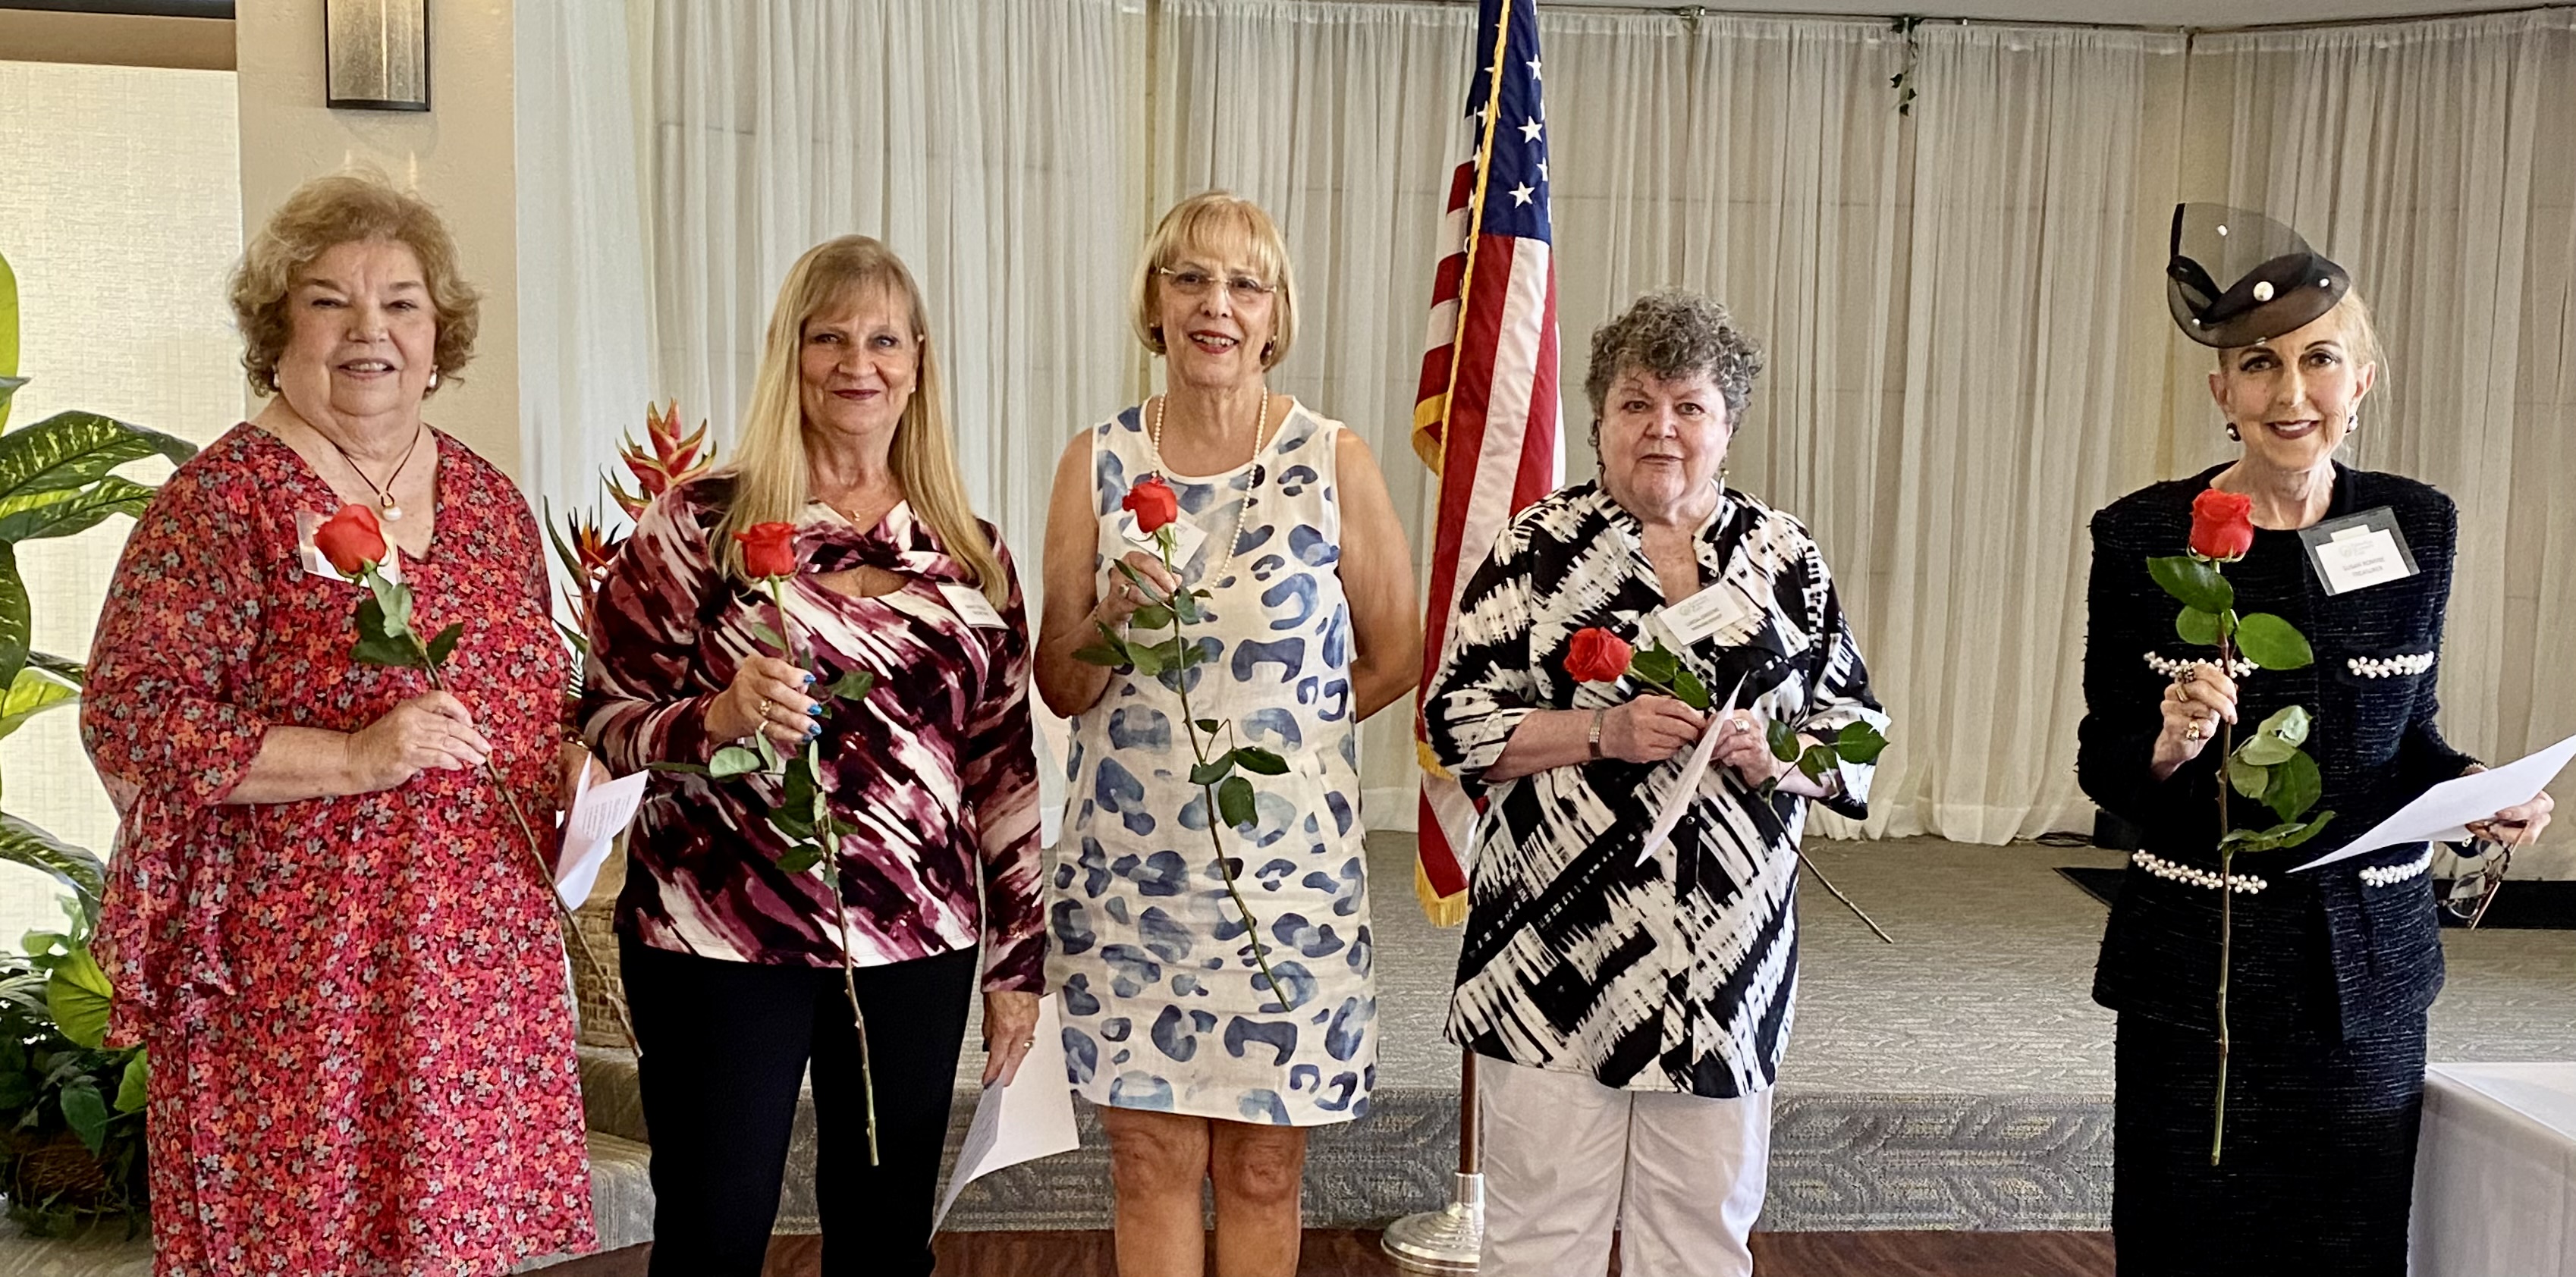 The new PAWC Board  was installed at the last meeting. Left to  Right, President Peg McKinley, Recording Secretary Nancy Curley, Vice President Ann King, Corresponding Secretary Linda Greene and Treasurer Susan Romine. 